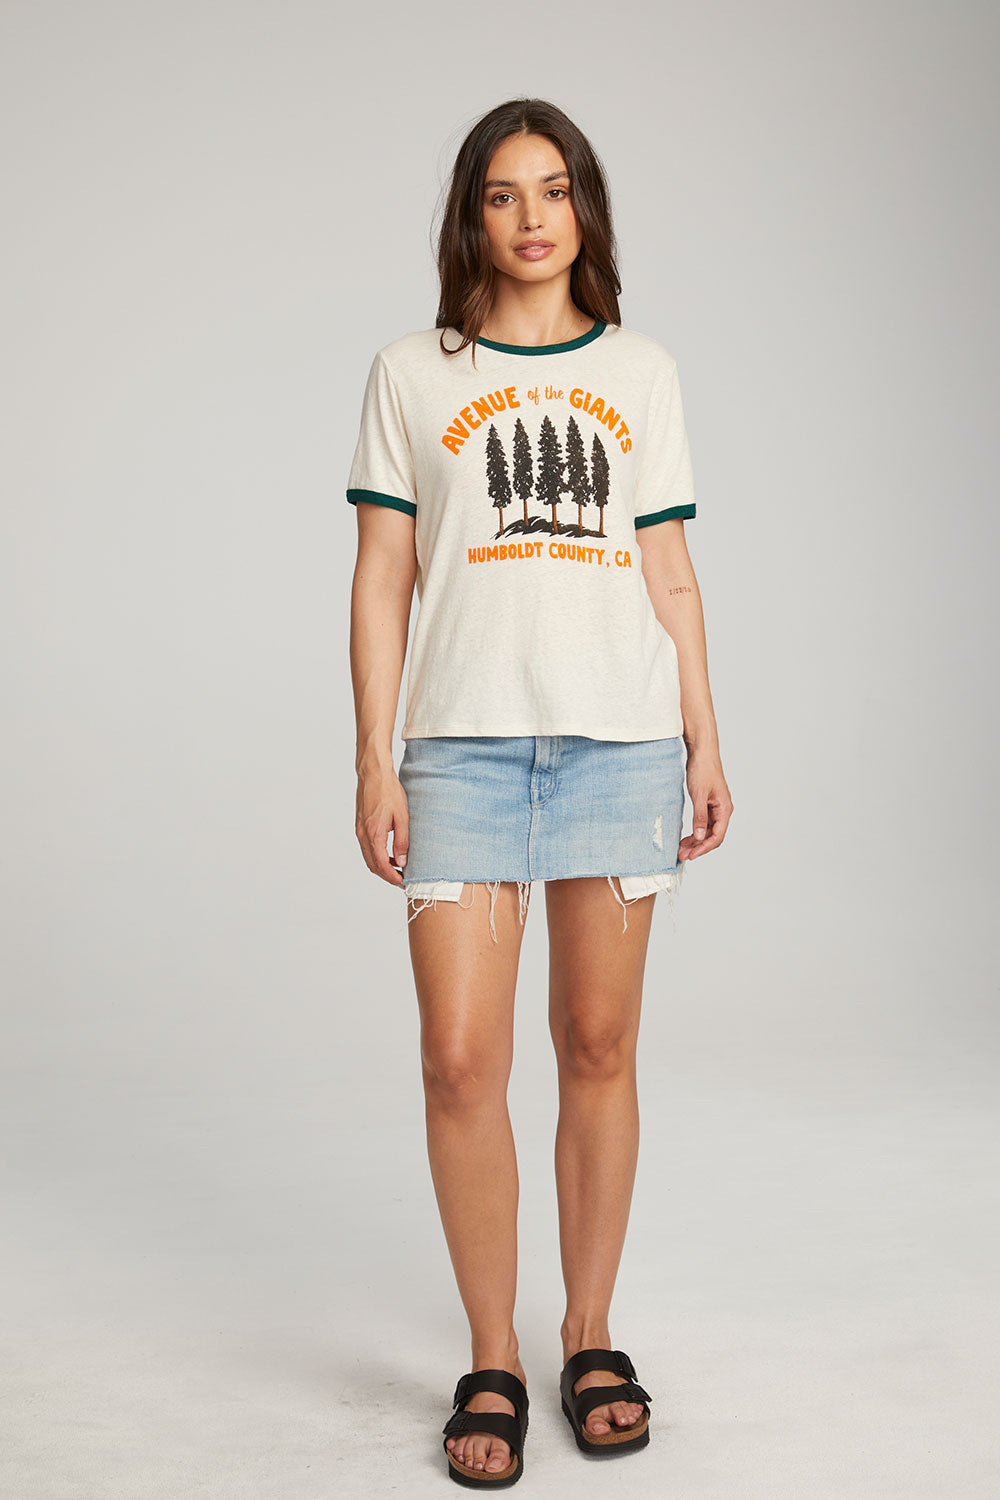 Avenue Of The Giants Crew Neck Tee WOMENS chaserbrand